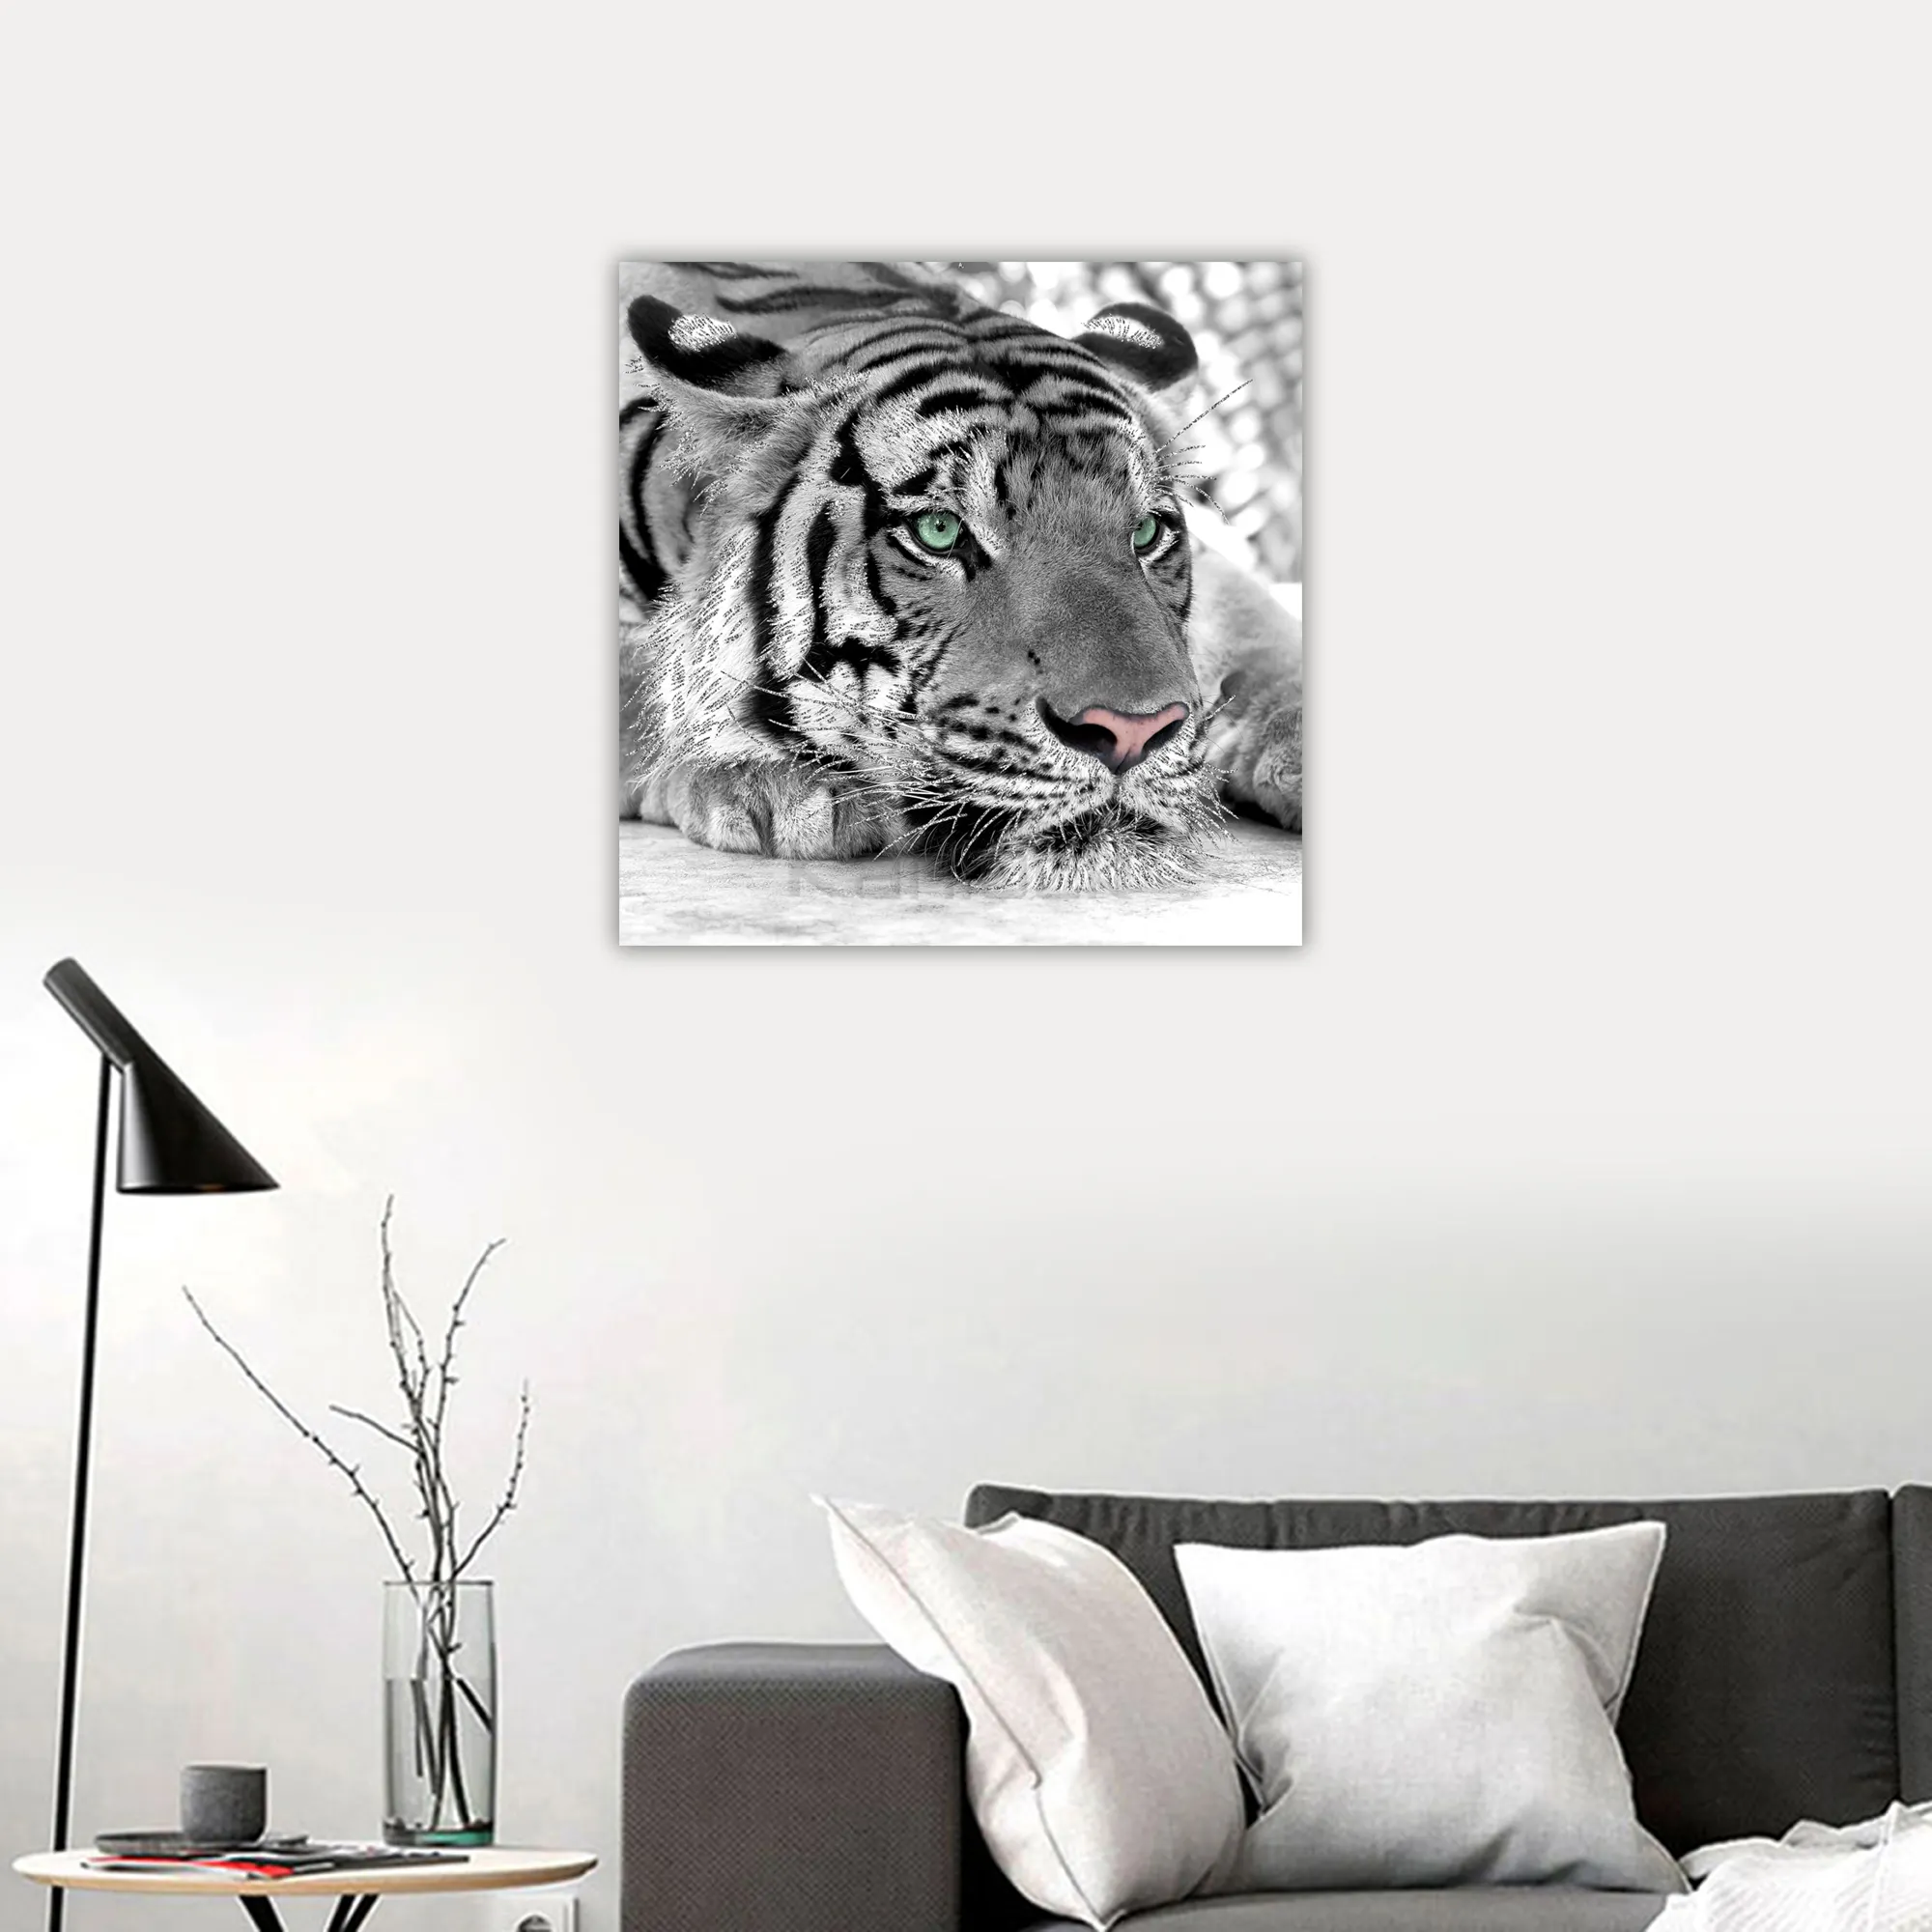 Black and White Africa Animal Tiger Embellished Canvas Printing Painting Wall Art With Glitter